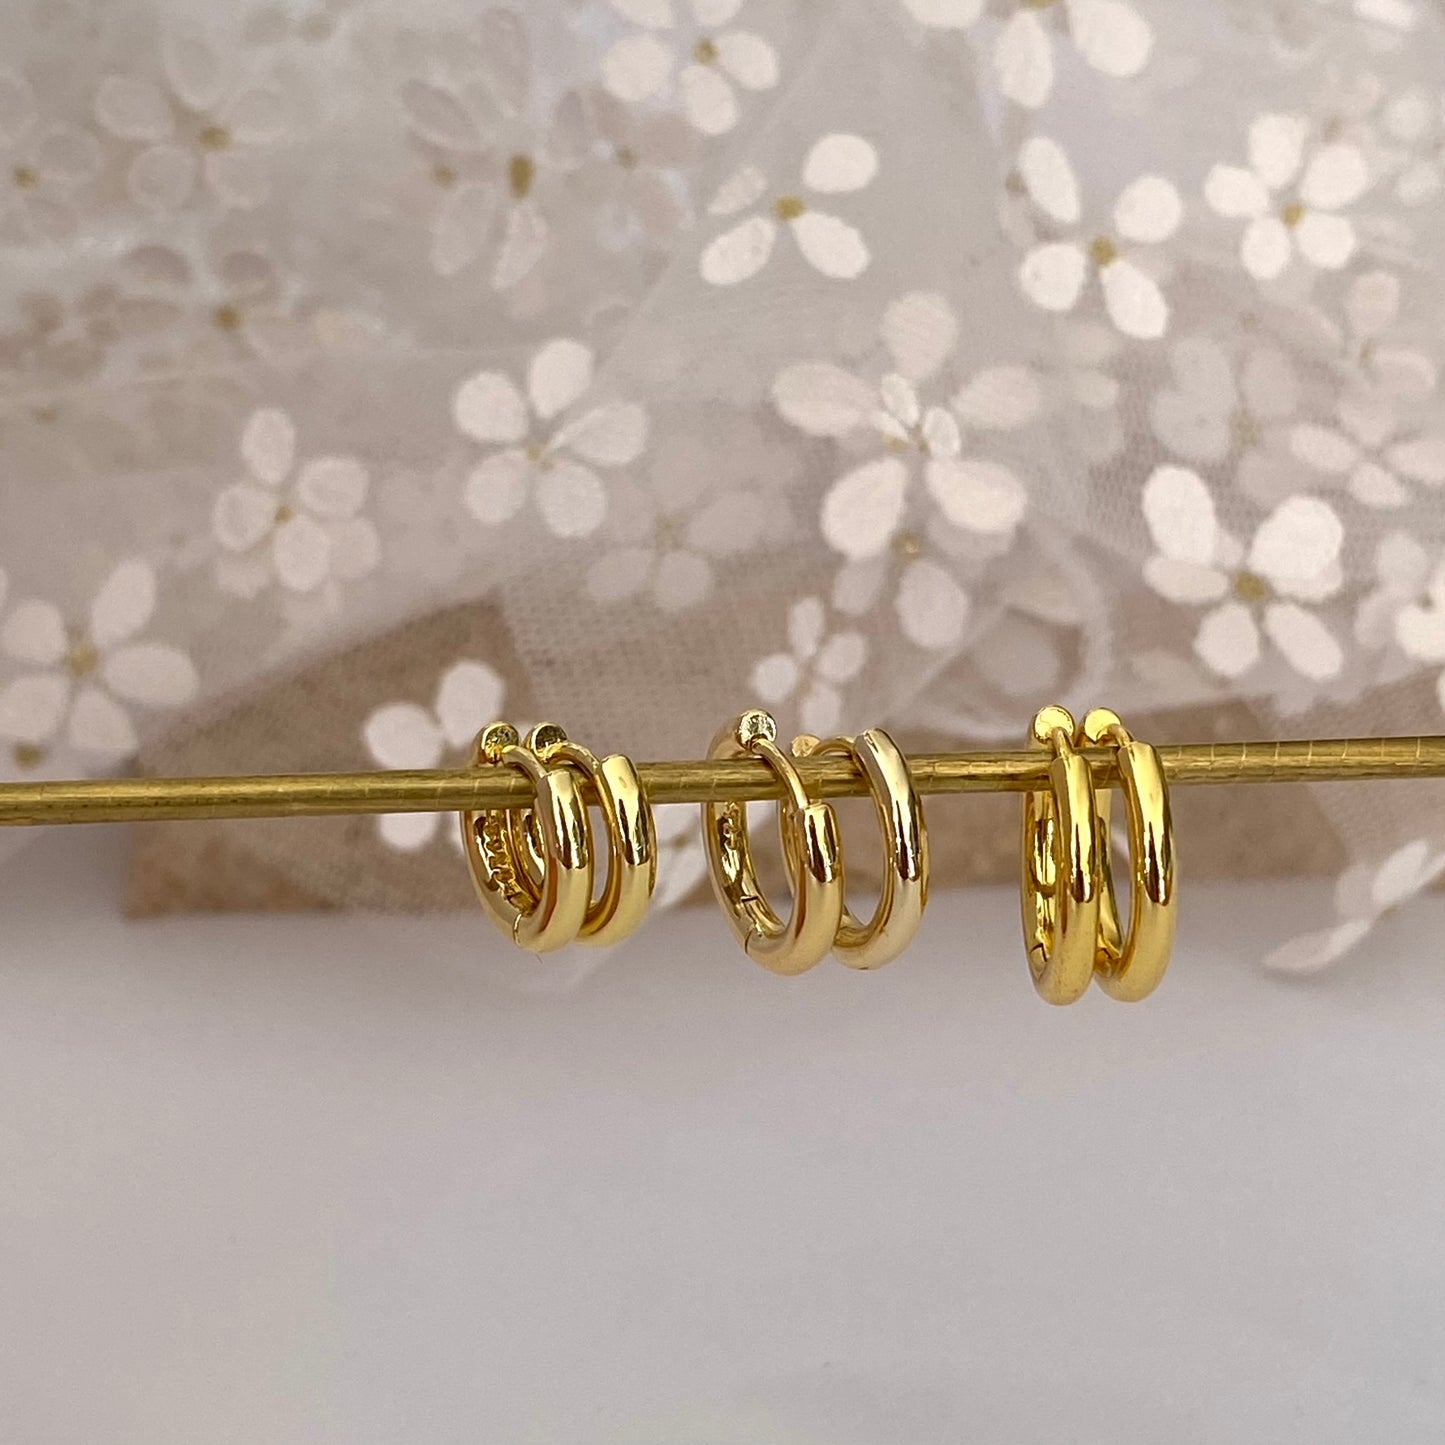 Basic Gold Hoop Earrings 925 sterling silver with 18k gold plated